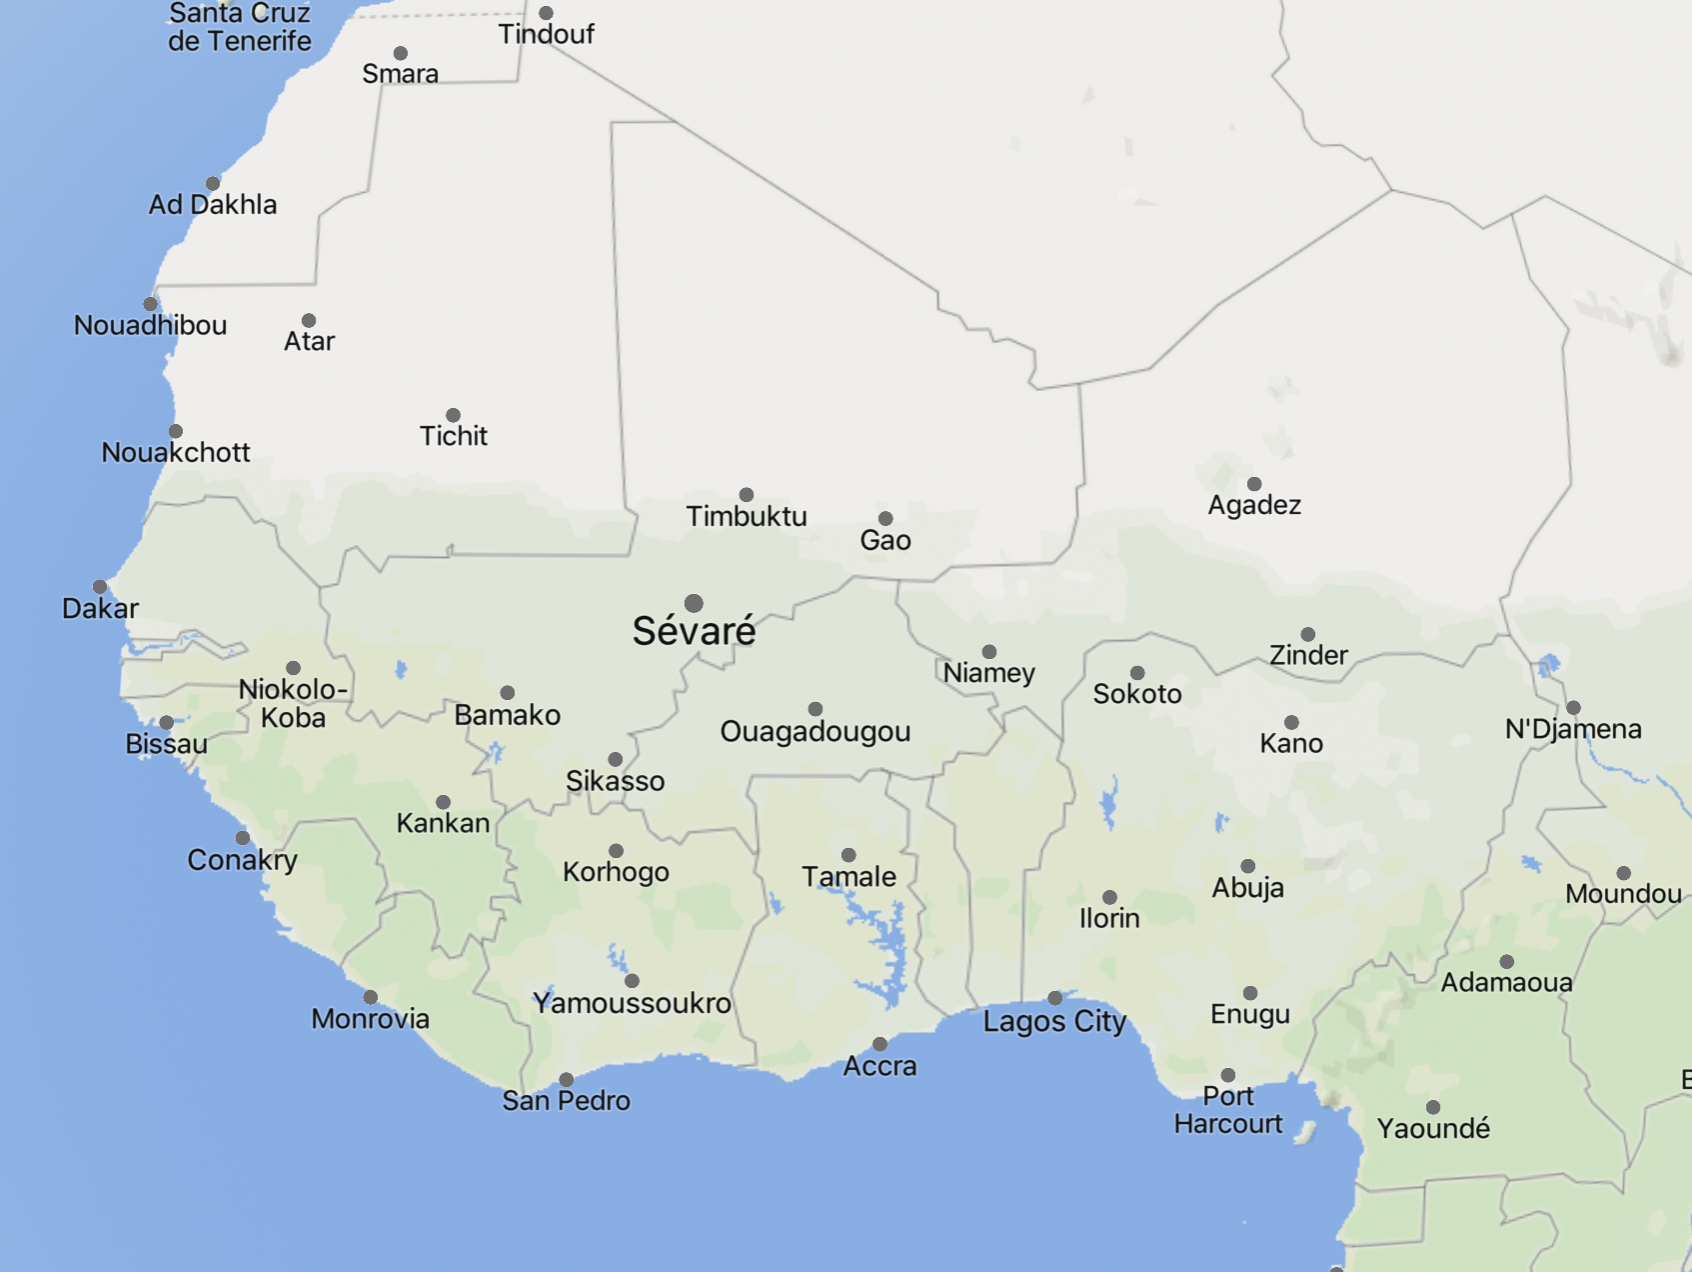 Location of Sevare, Mopti, Mali in relation to Gao and Timbuktu